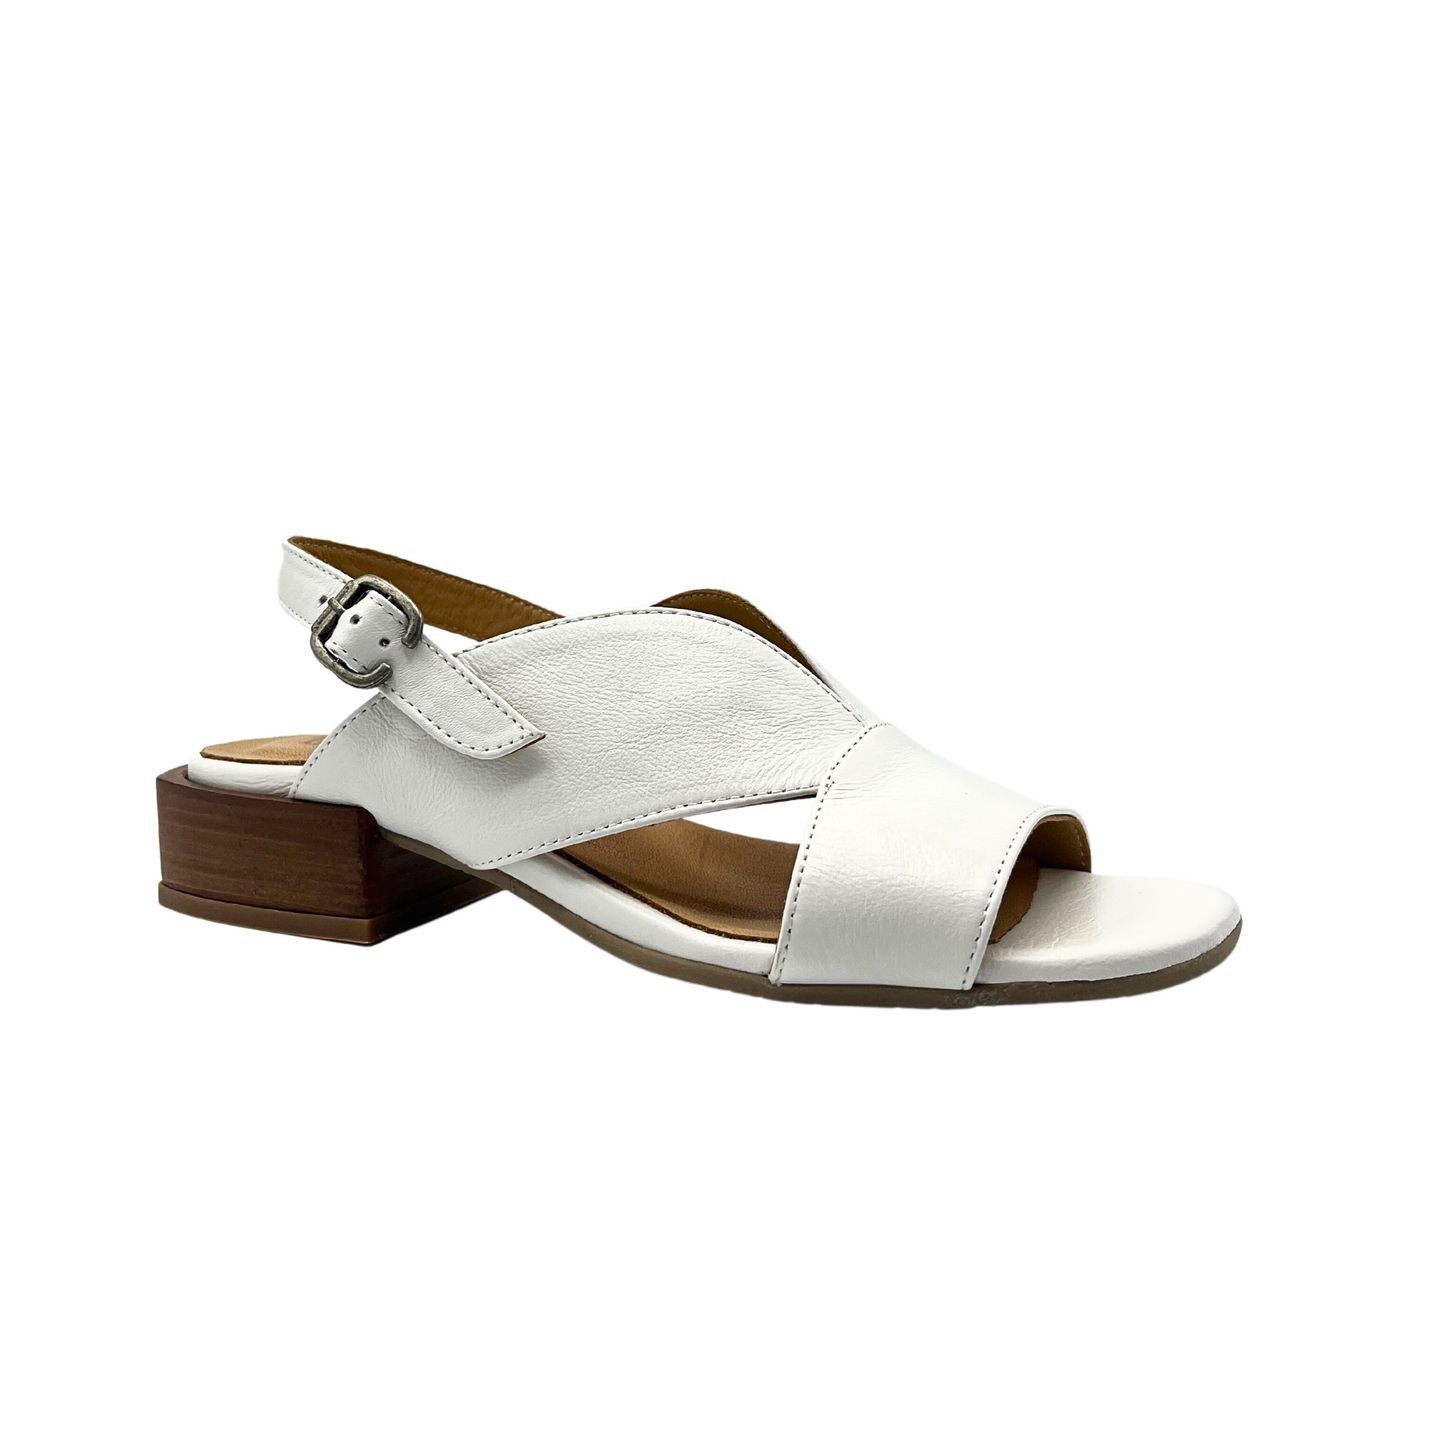 Outer side view of a classic summer sandal with low block heel and adjustable back strap